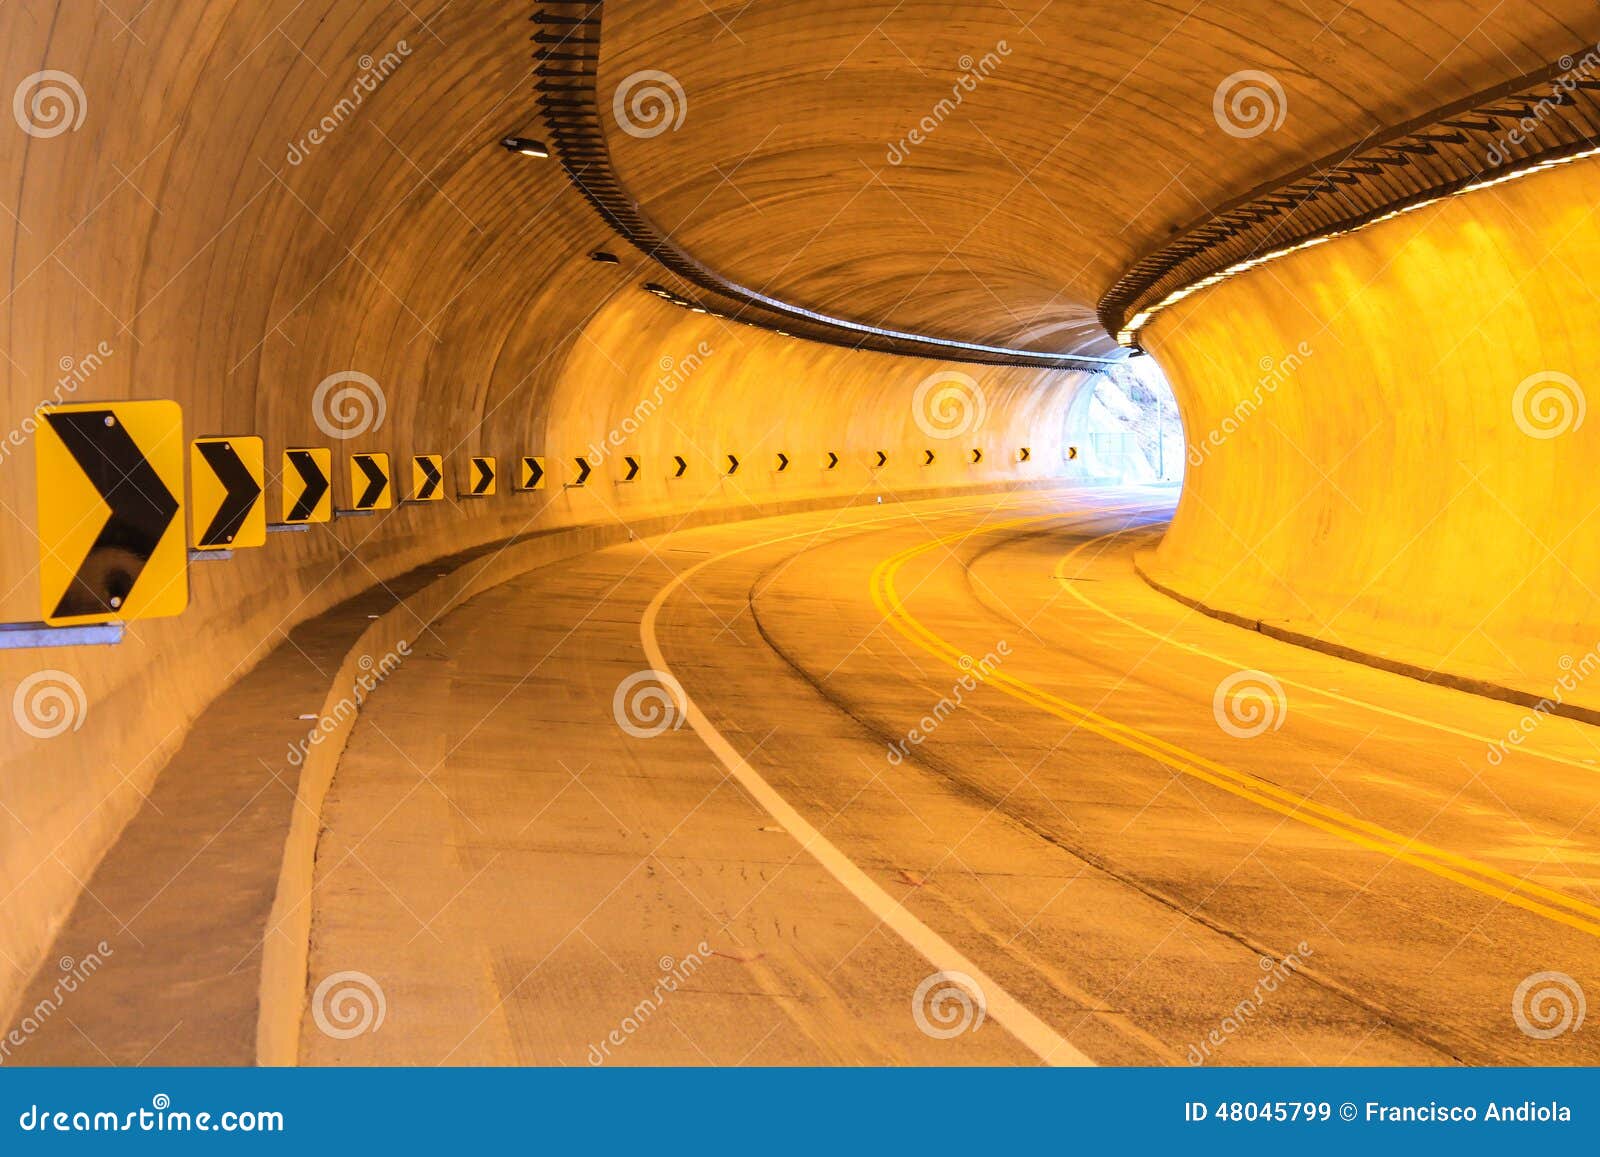 light tunnel and pointing curve in